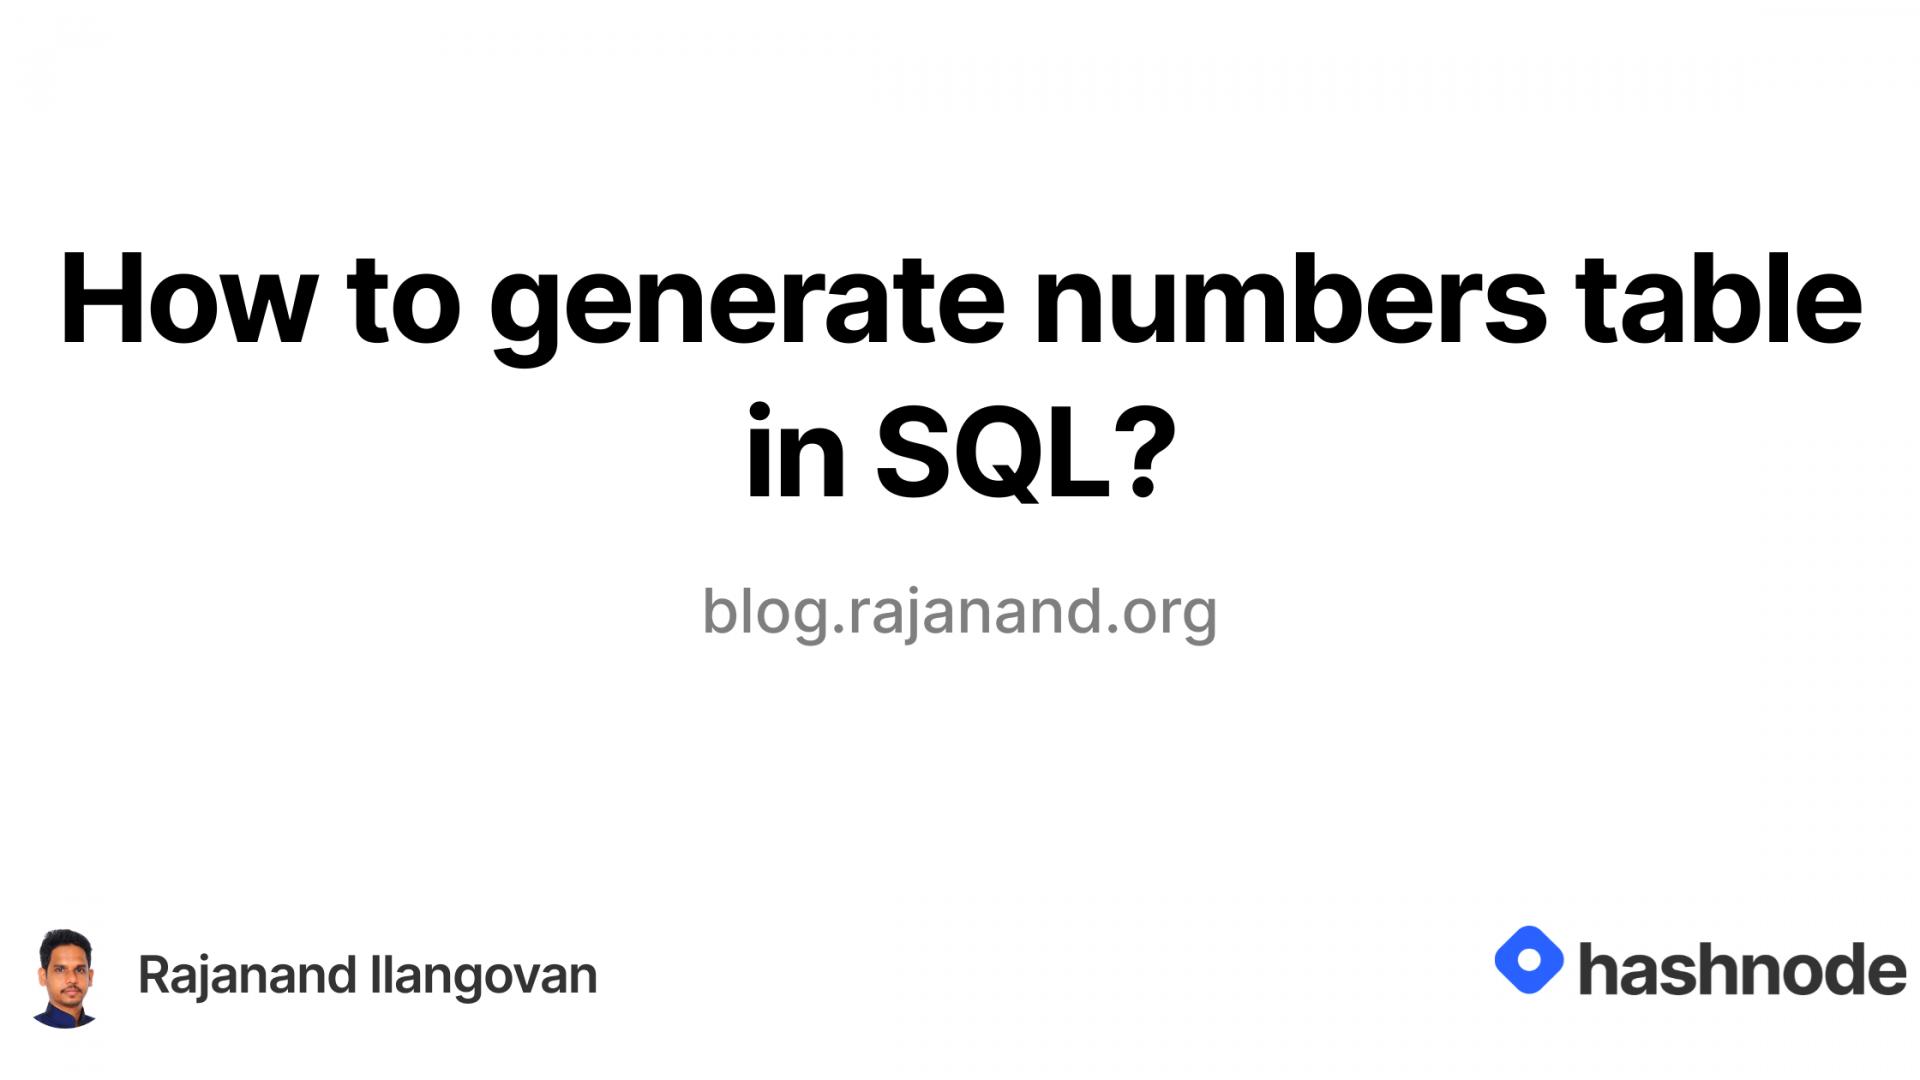 How to generate numbers table in SQL?